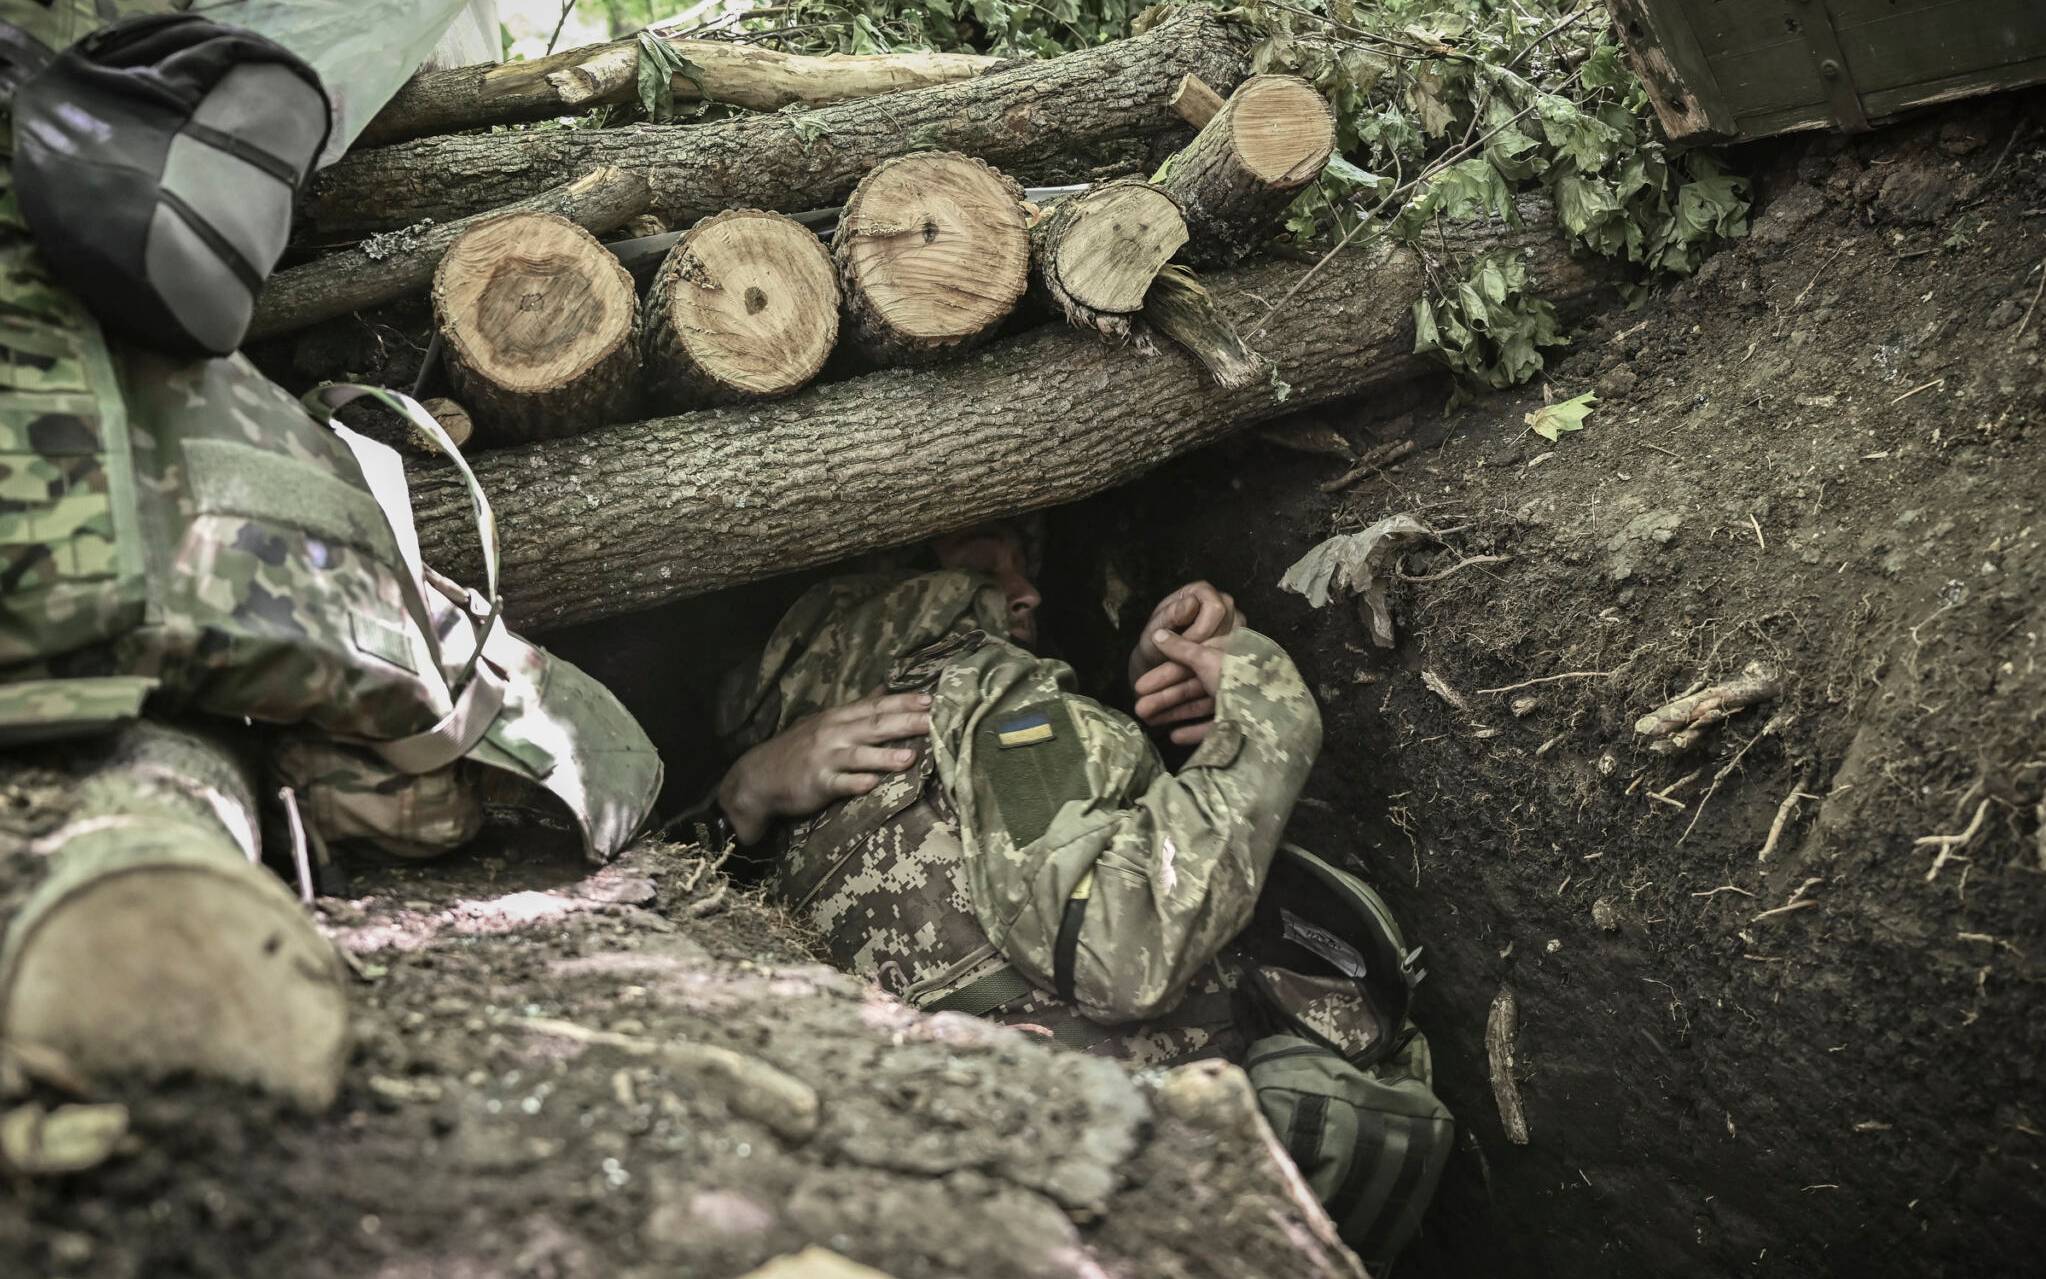 Ukrainian servicemen take cover during a shelling at a field camp near the front line at an undisclosed location in the eastern Ukrainian region of Donbas on June 6, 2022. (Photo by ARIS MESSINIS / AFP)